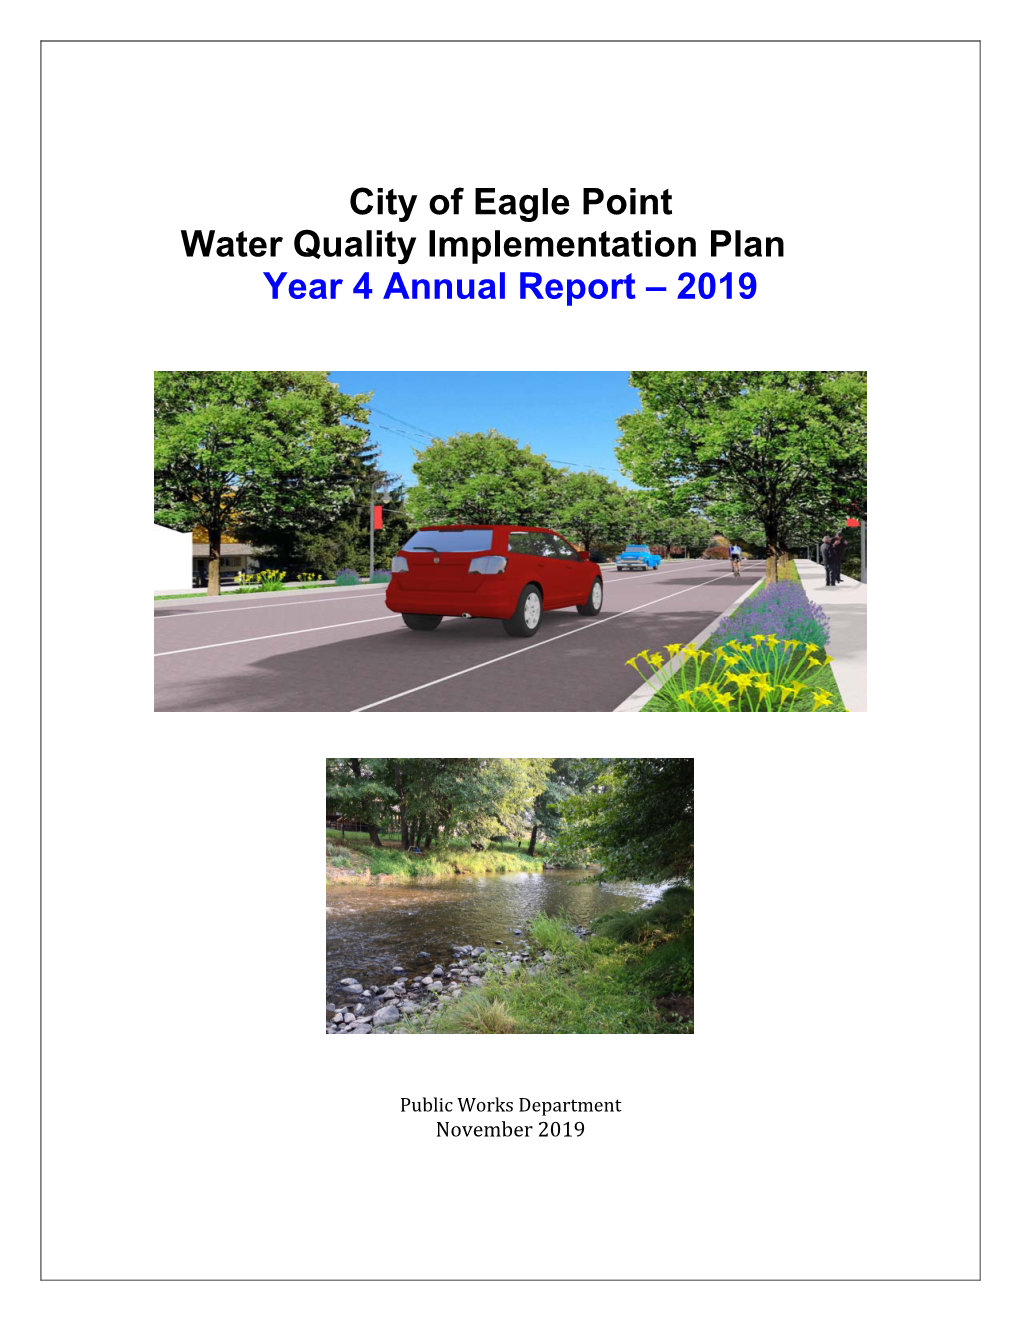 City of Eagle Point Water Quality Implementation Plan Year 4 Annual Report – 2019